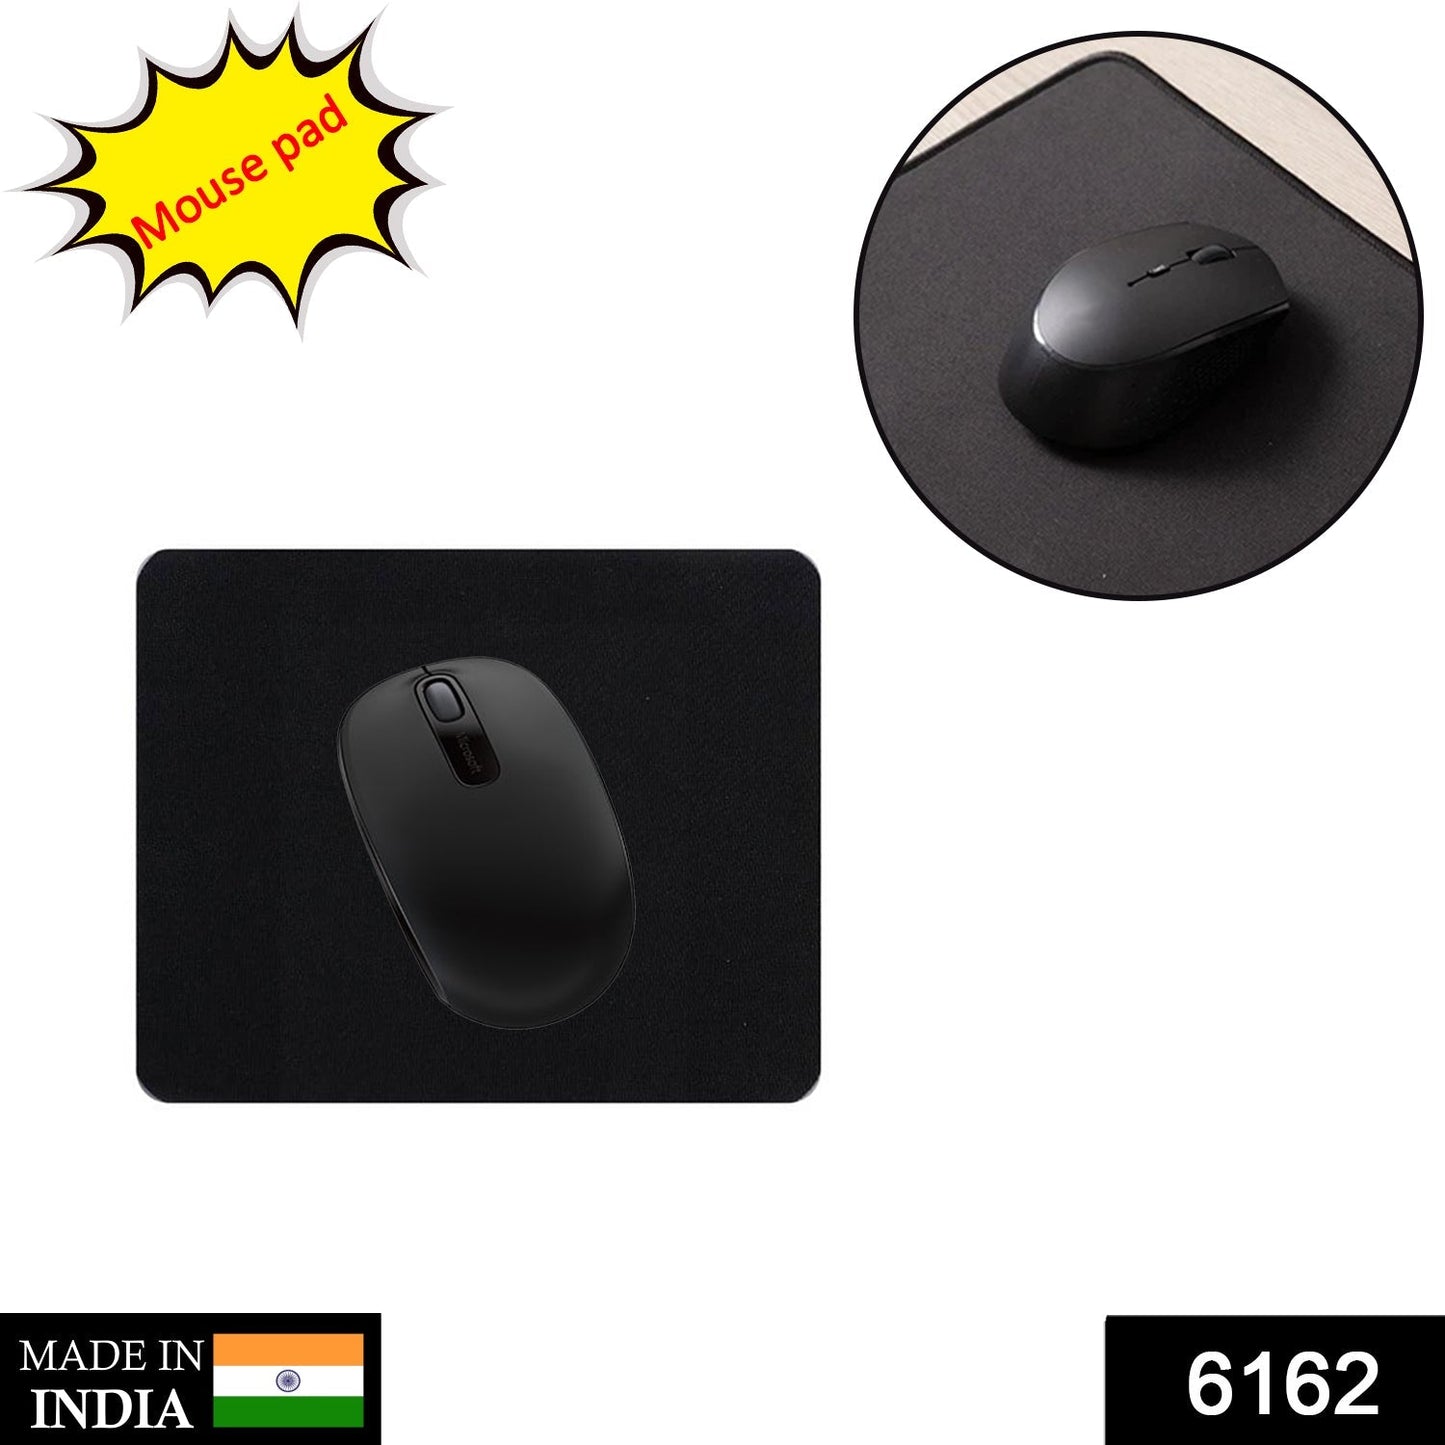 6162 Simple Mouse Pad Used For Mouse While Using Computer. DeoDap